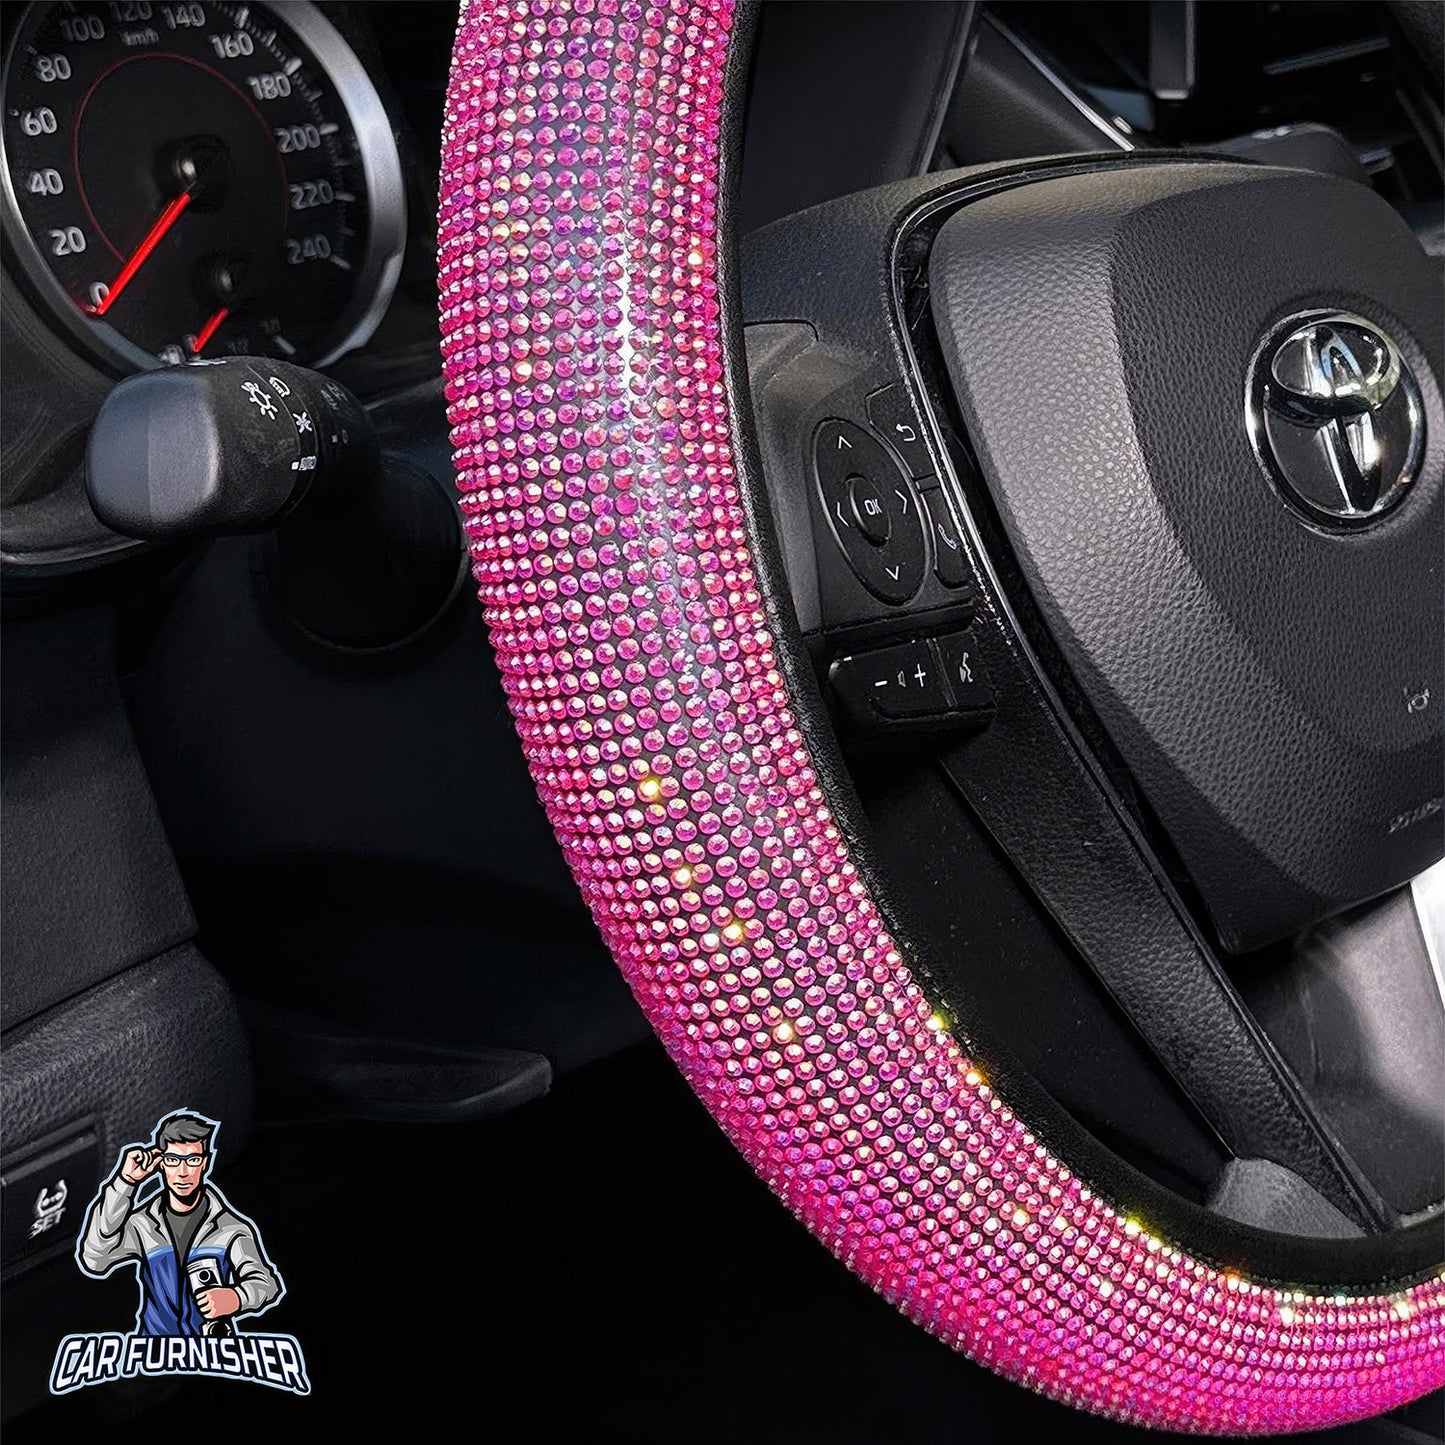 Steering Wheel Cover - Full Stone Shiny Look Pink Leather & Fabric